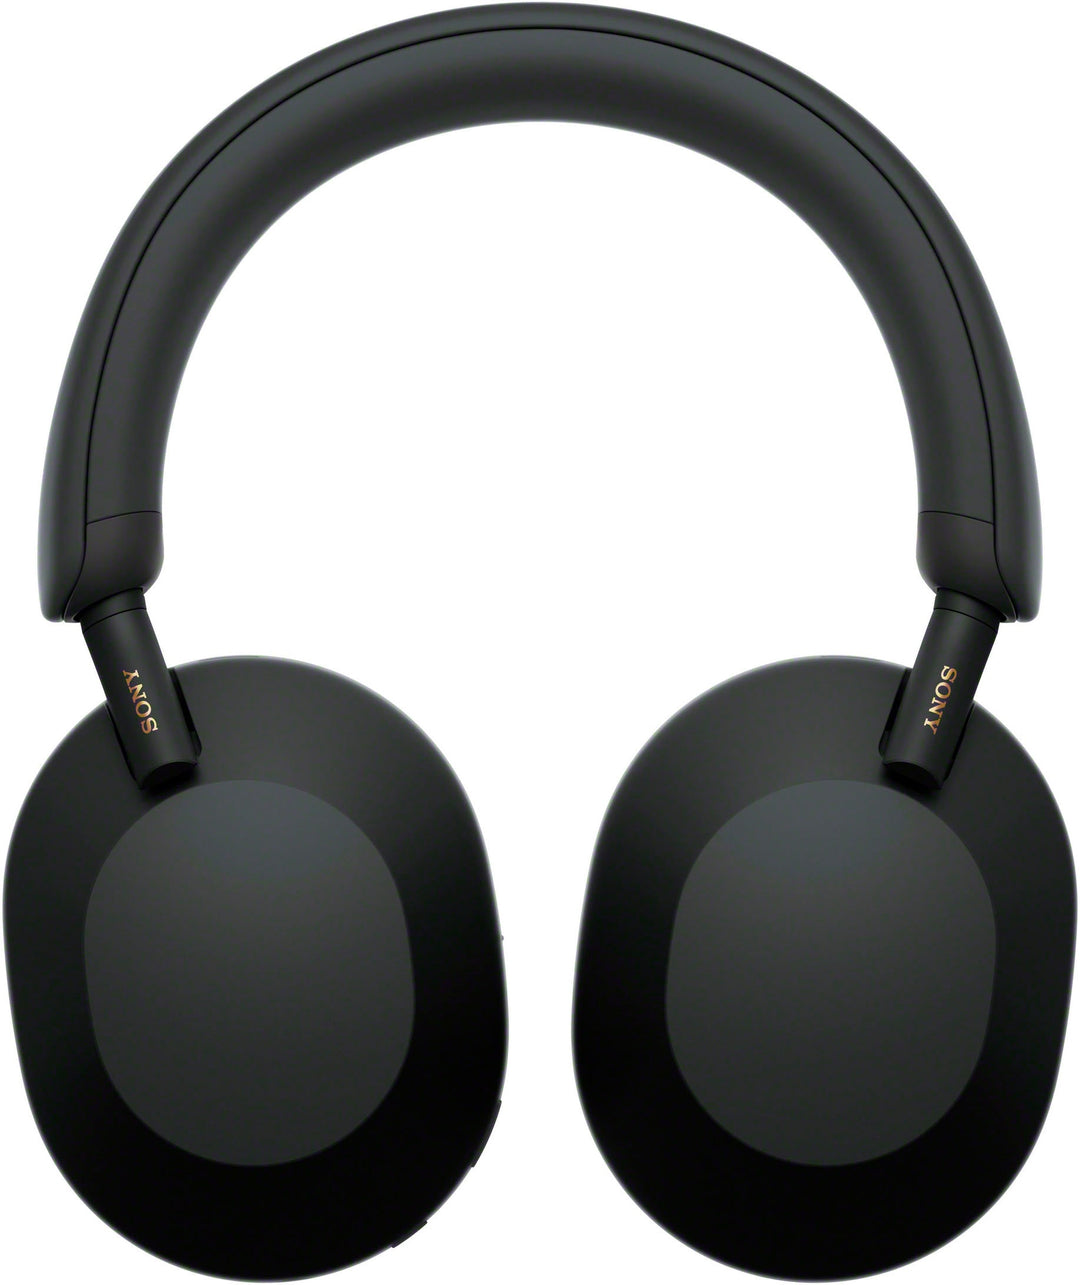 Sony - WH-1000XM5 Wireless Noise-Canceling Over-the-Ear Headphones - Black_2